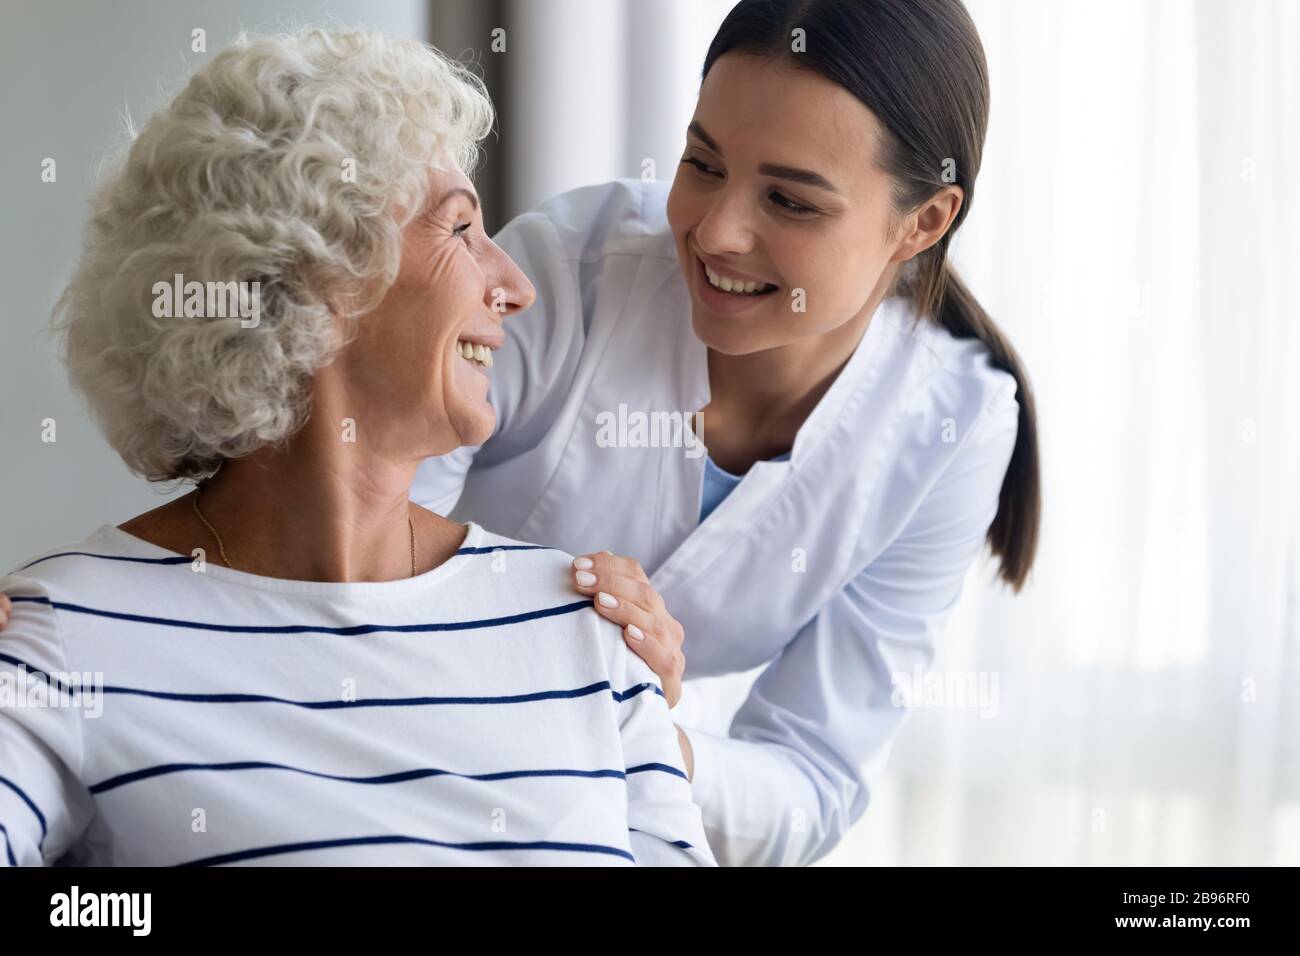 Caring young nurse assist handicapped mature female patient Stock Photo